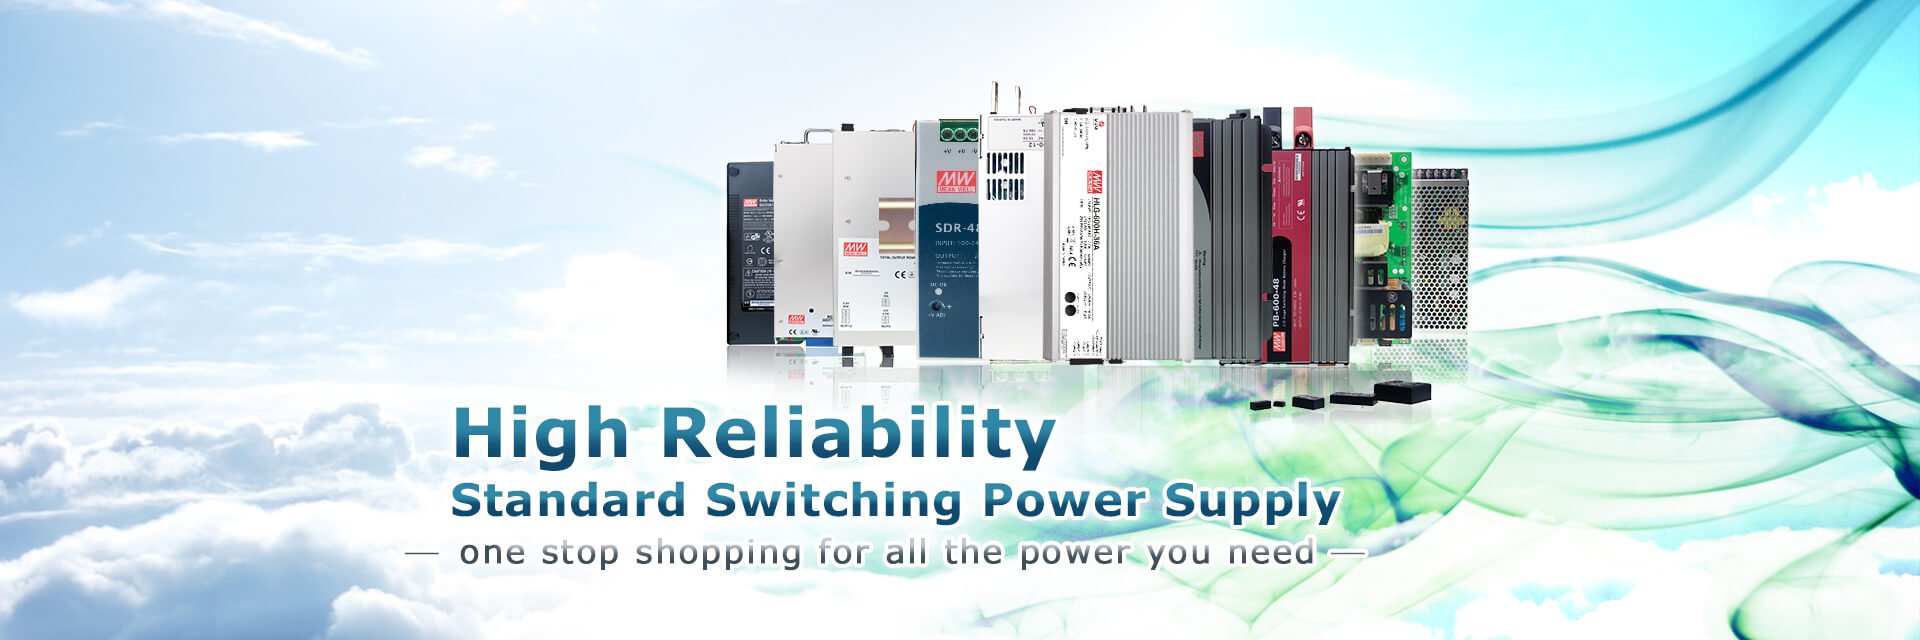 Meanwell power supplies